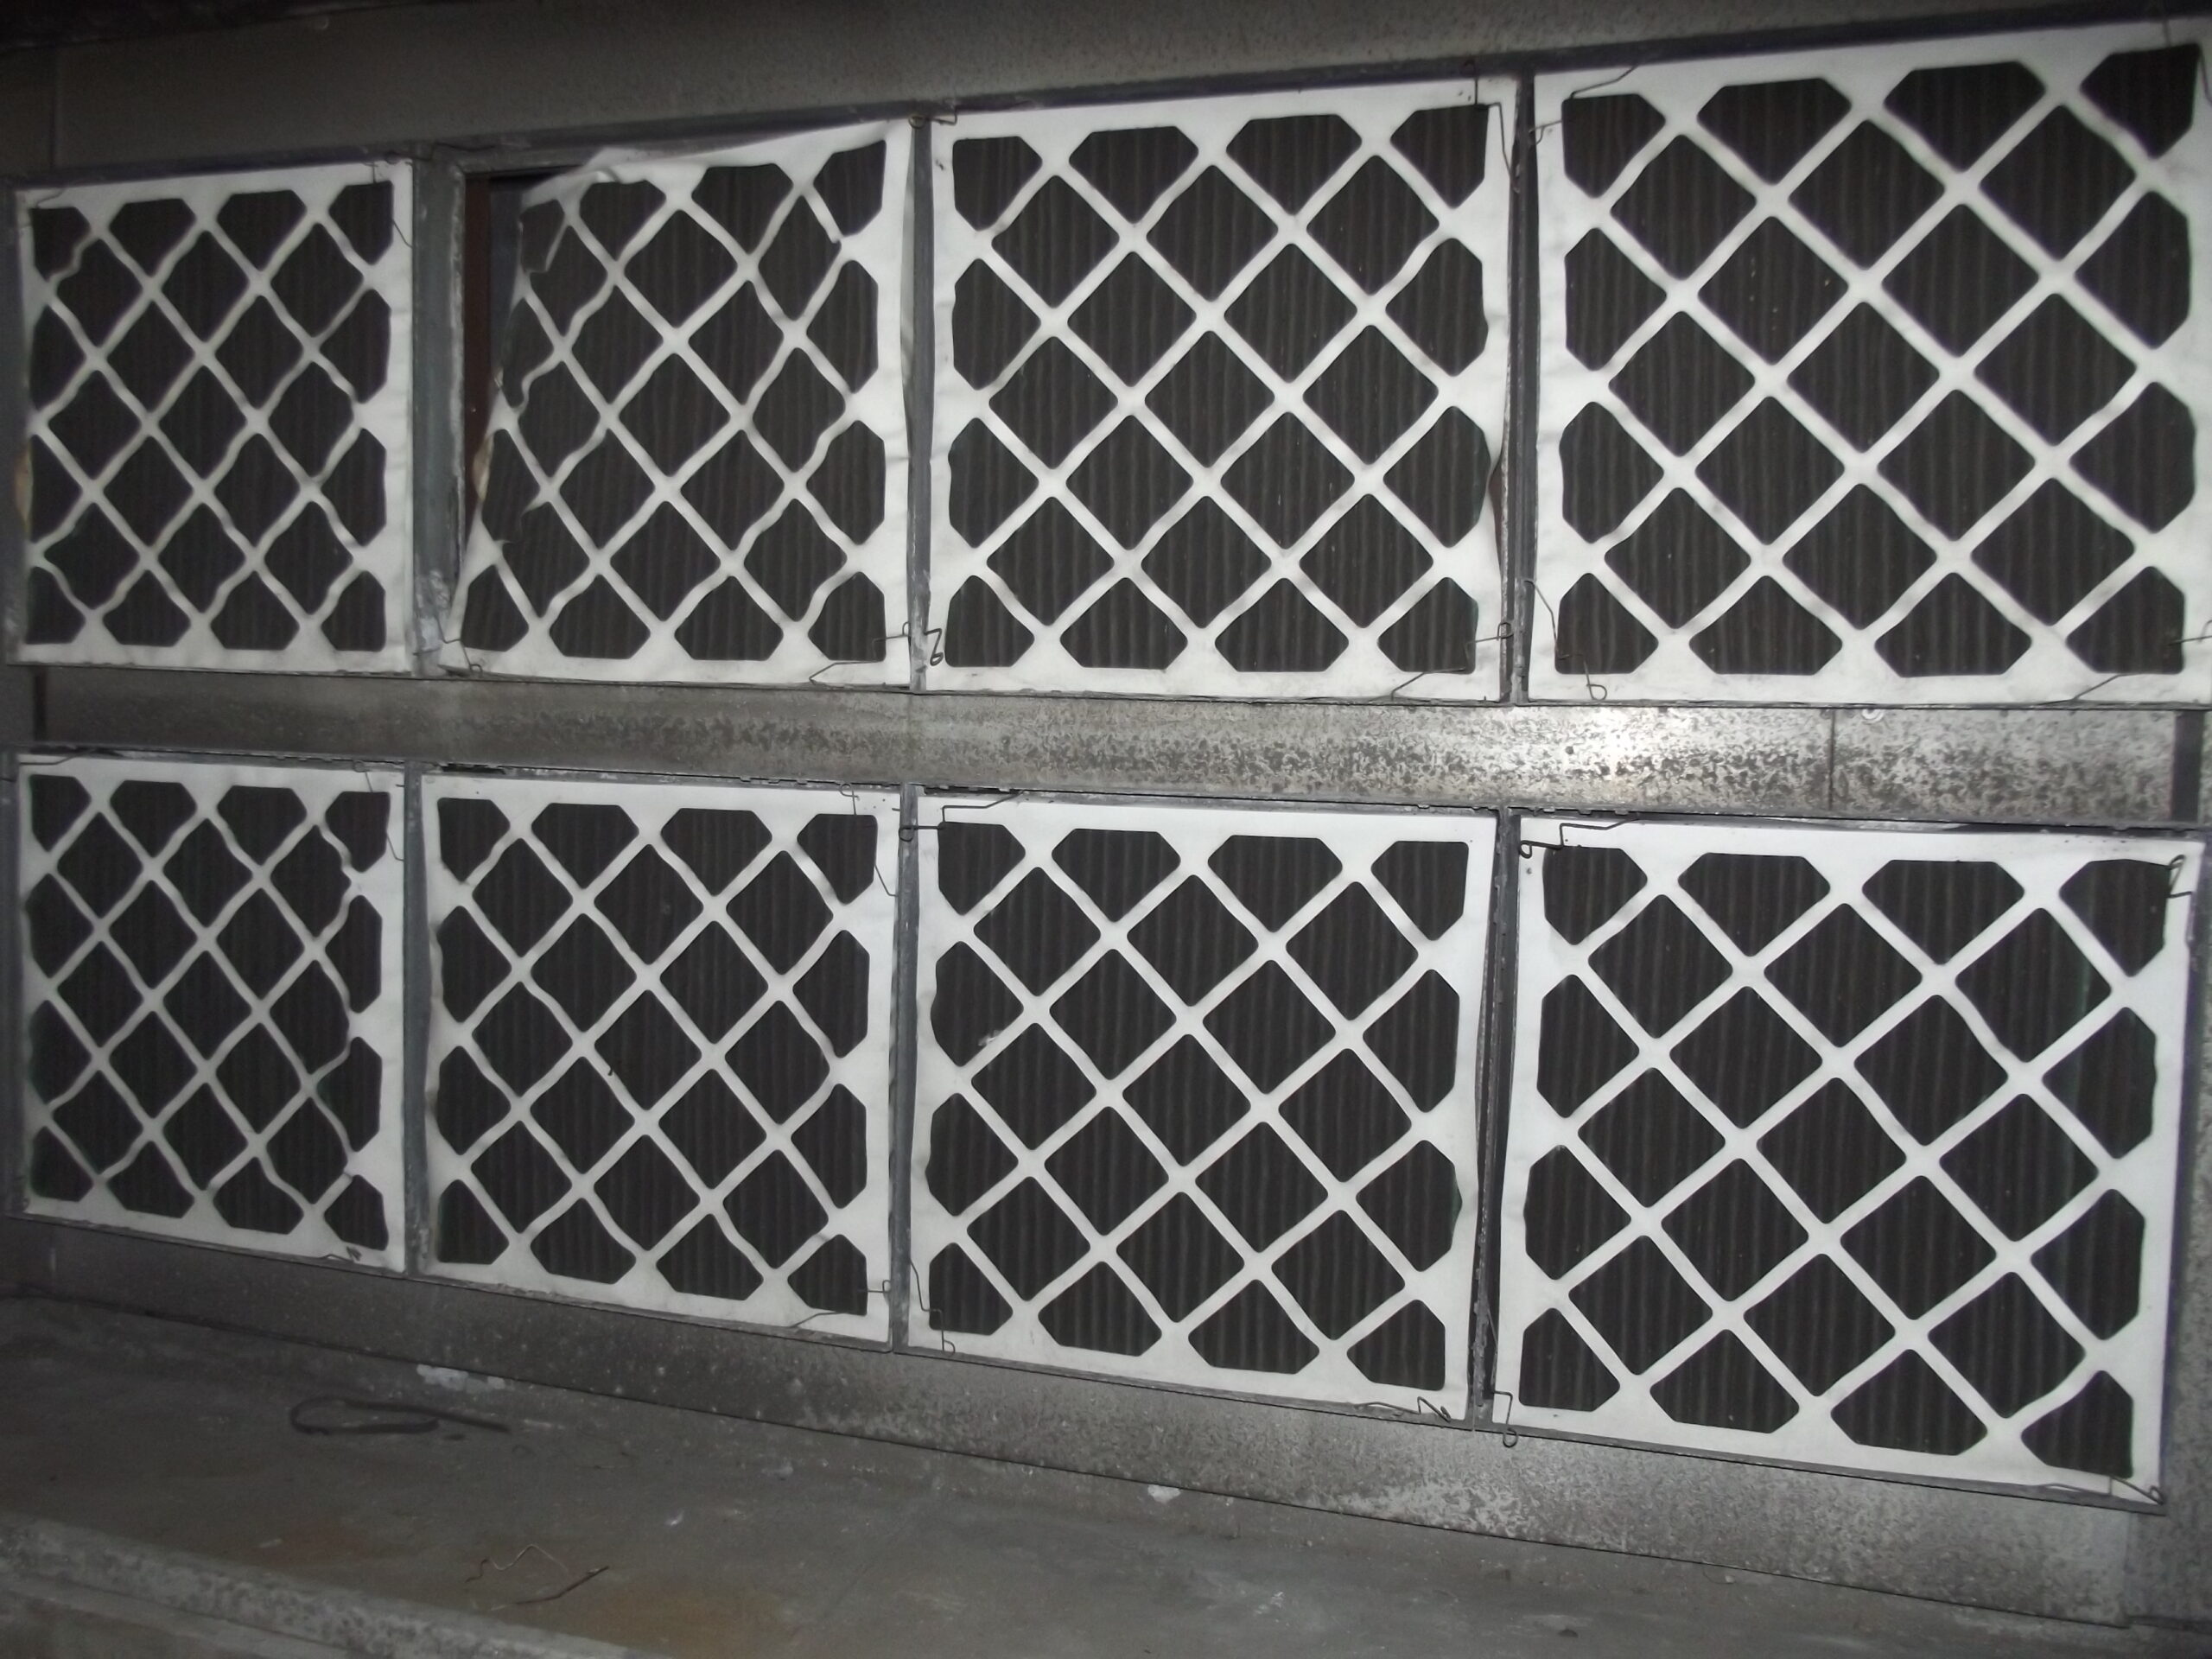 Air handling unit in E Core Penthouse - filters